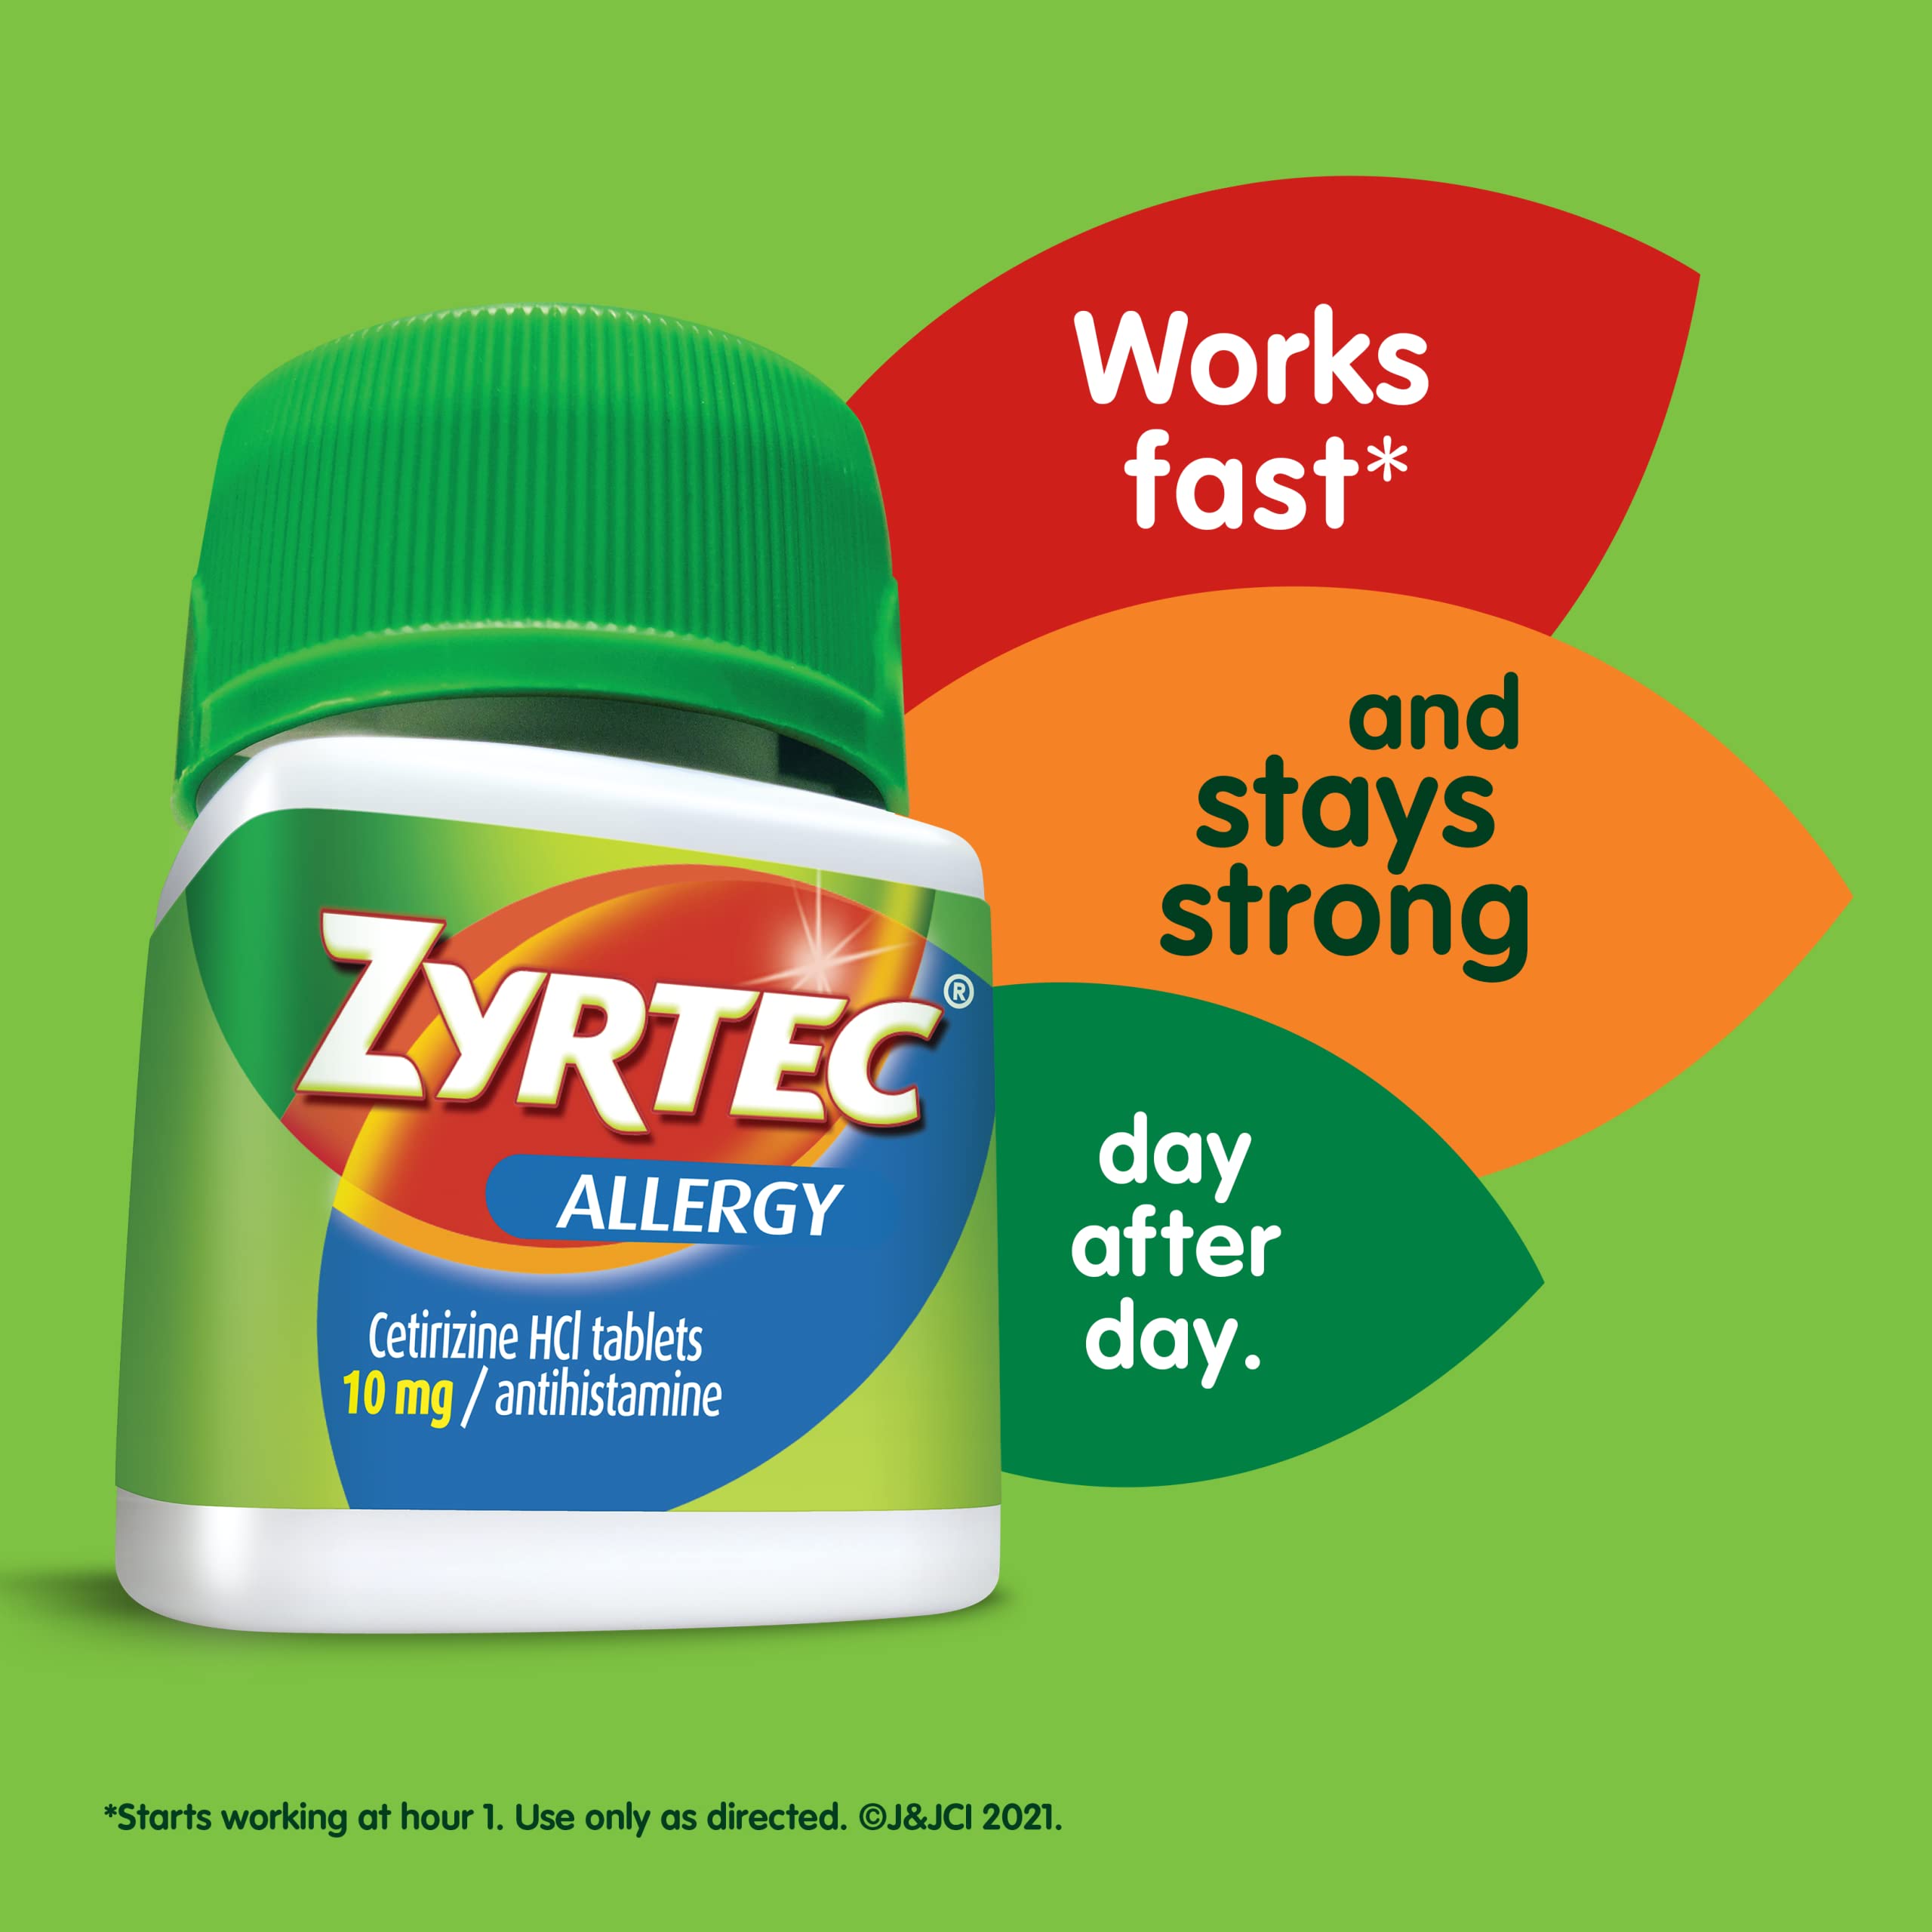 Zyrtec 24 Hour Allergy Relief Tablets, Indoor & Outdoor Allergy Medicine with 10 mg Cetirizine HCl per Antihistamine Tablet, 47ct Bundle Pack (1 x 30ct, 14ct and 3x1ct)